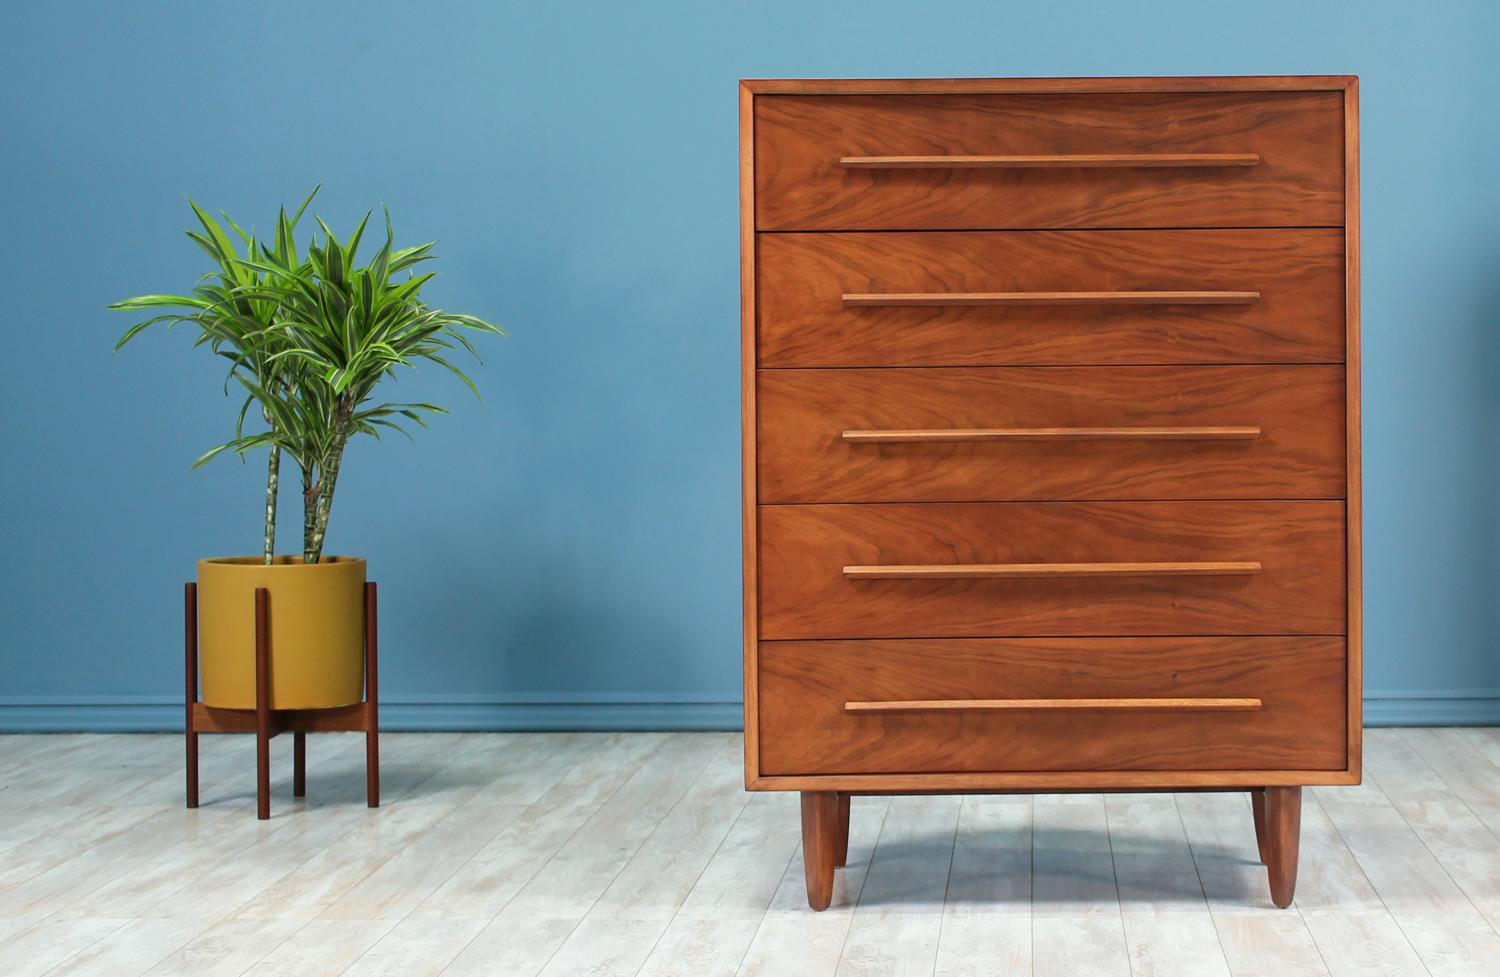 Chest of drawers designed by T.H. Robsjohn-Gibbings and manufactured by Widdicomb in the United States circa 1950’s. This design features a tall walnut wood body that sits on four tapered legs. The front, including the drawers, is concaved giving